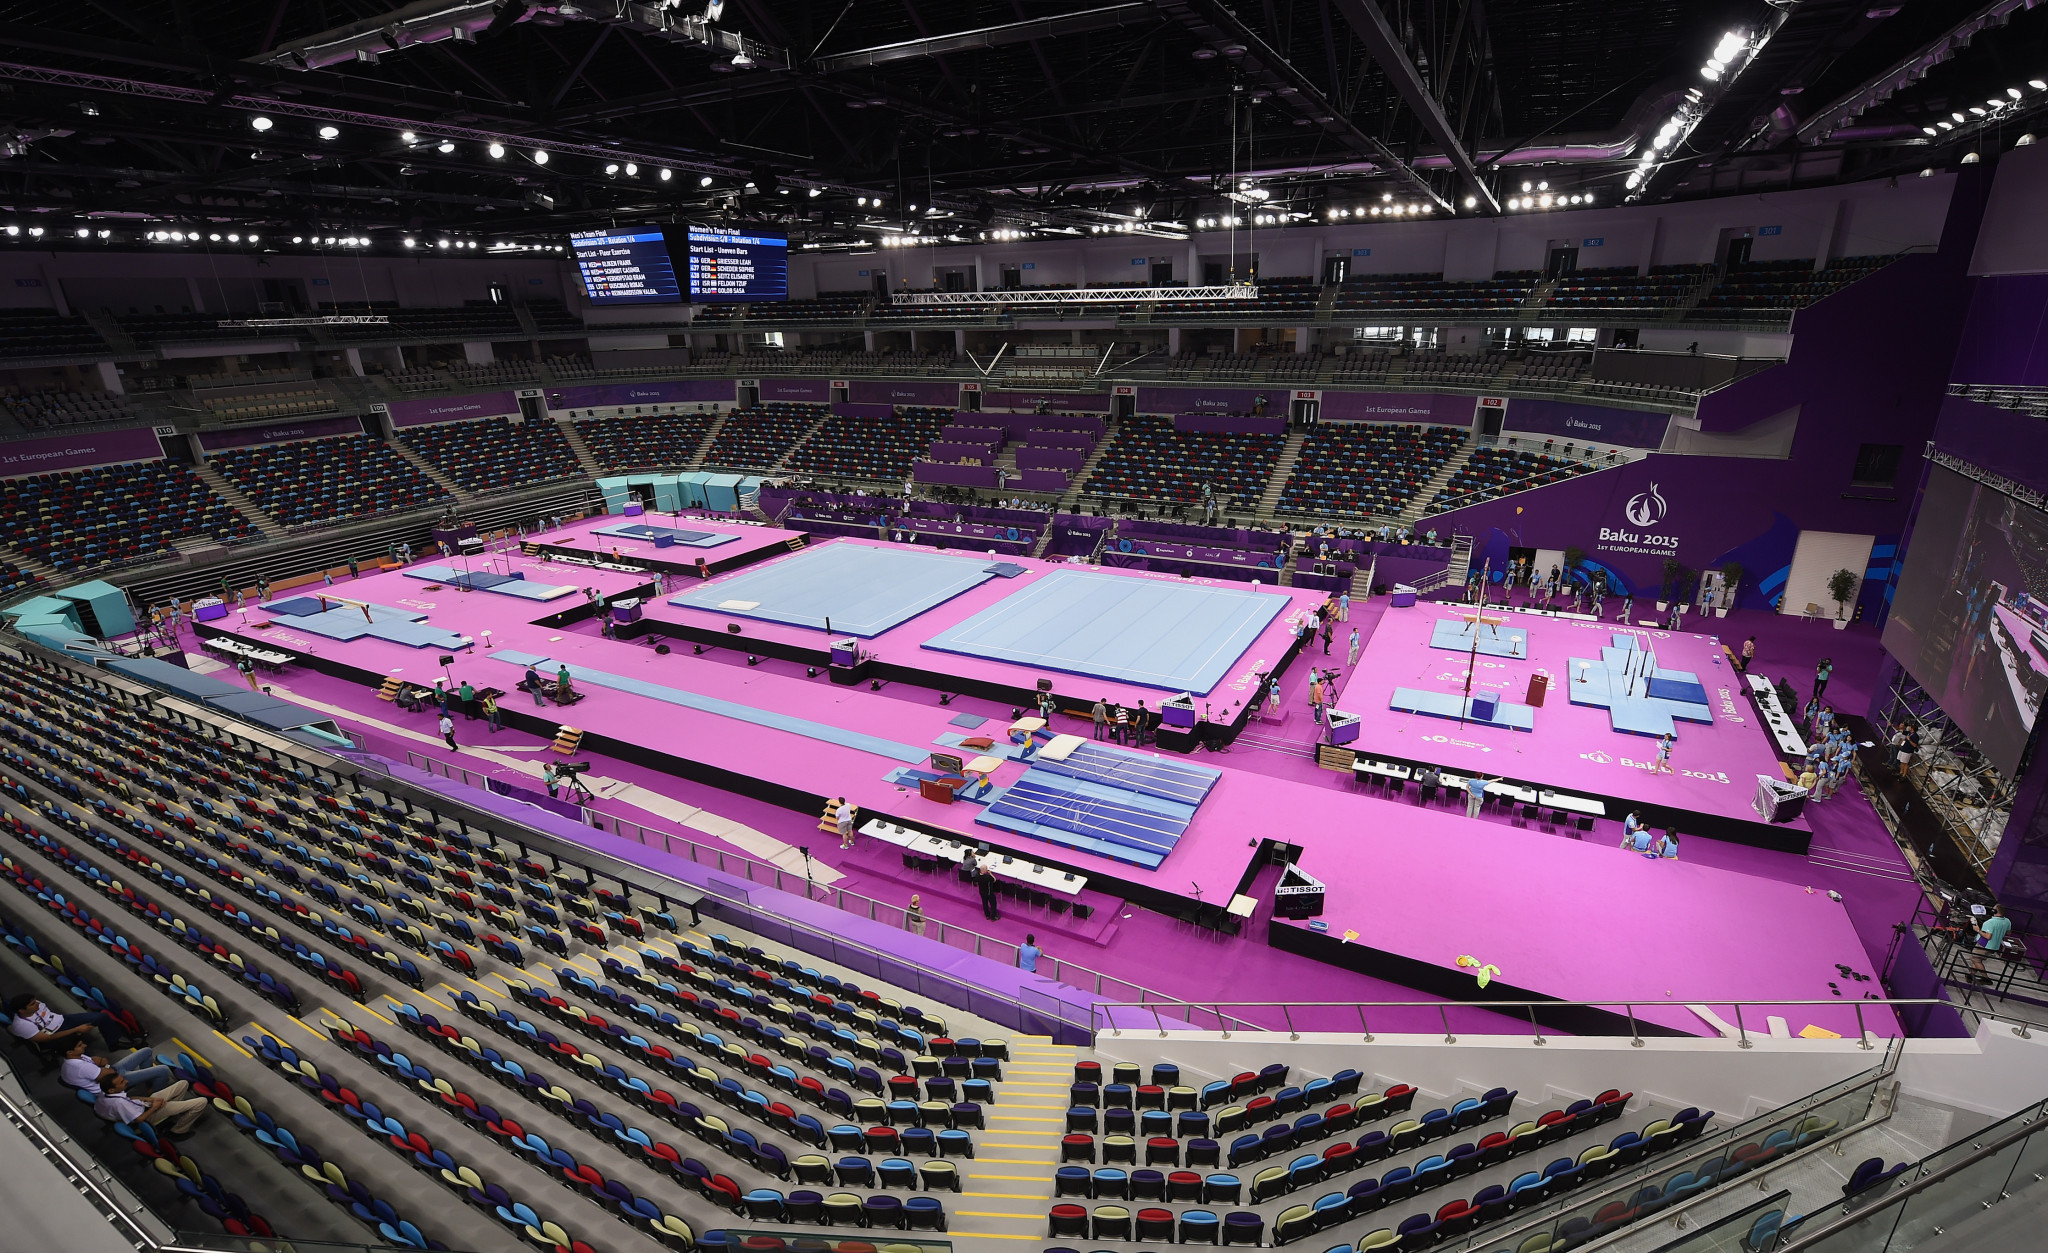 The National Gymnastics Arena has become known as a World Championship host ©Getty Images